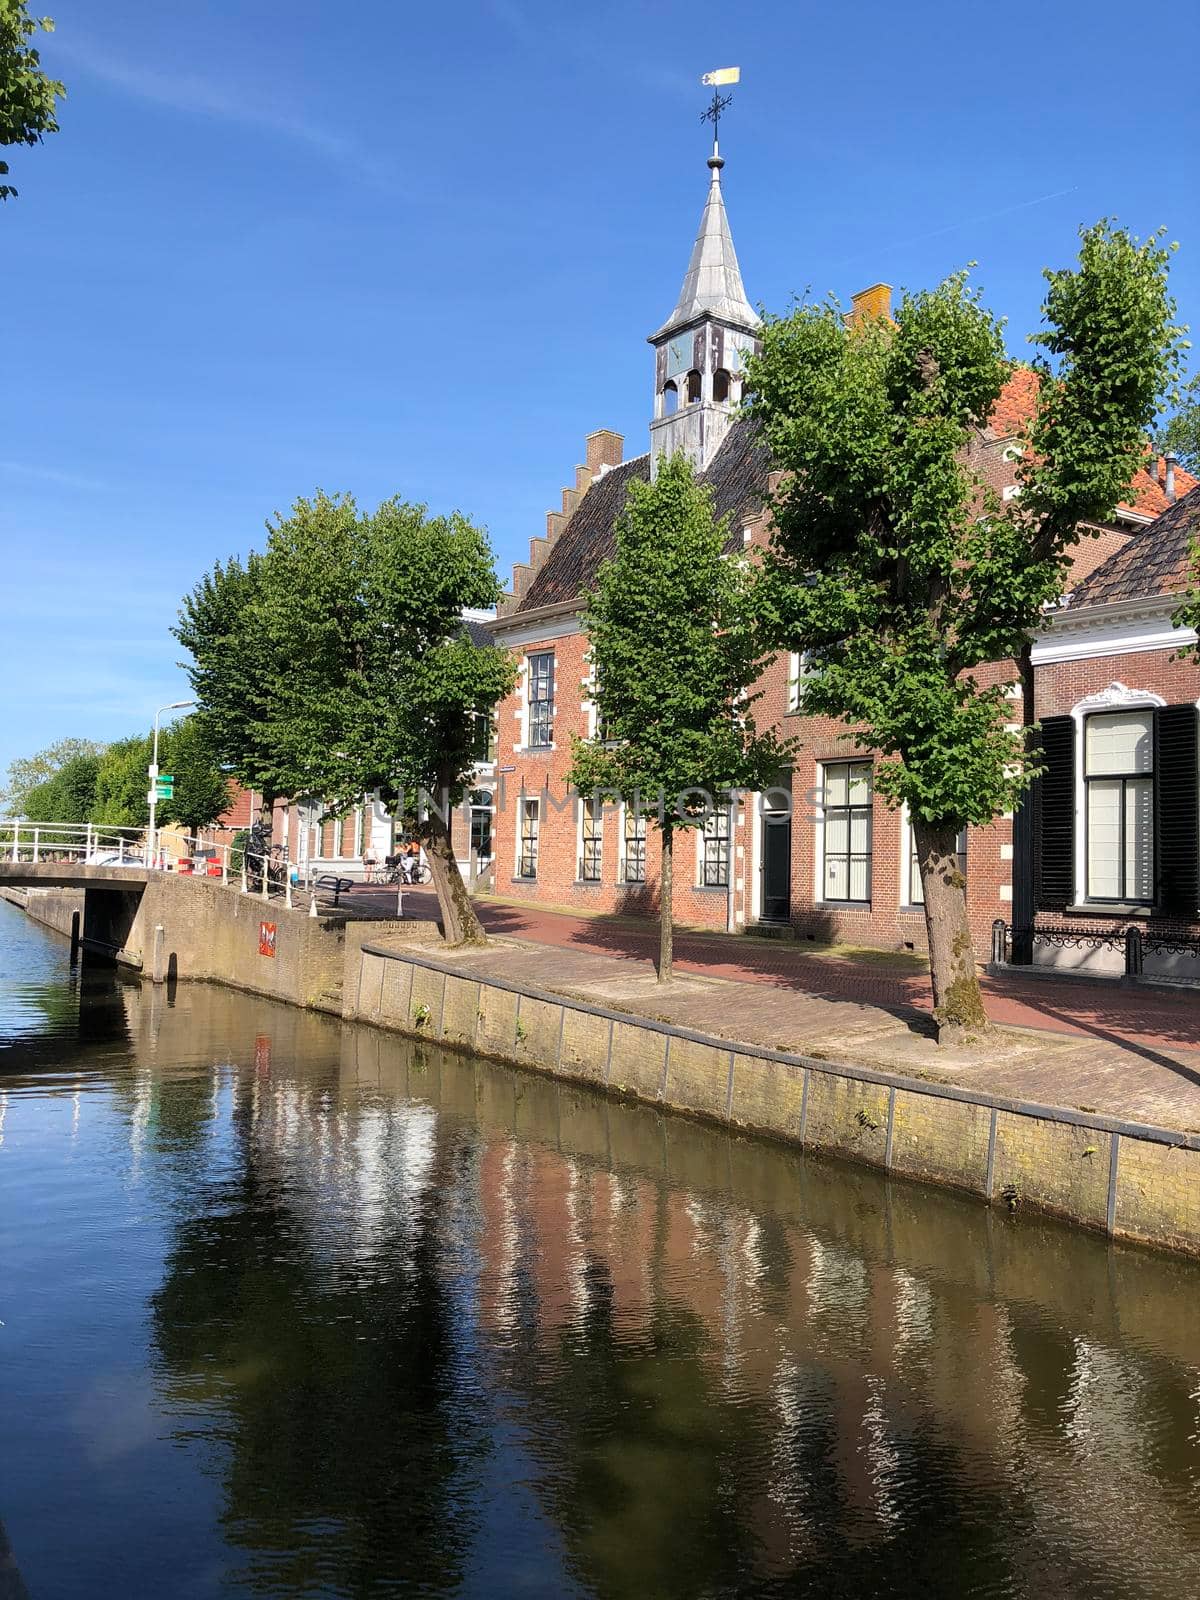 Architecture next to the canal in balk, Friesland The Netherlands